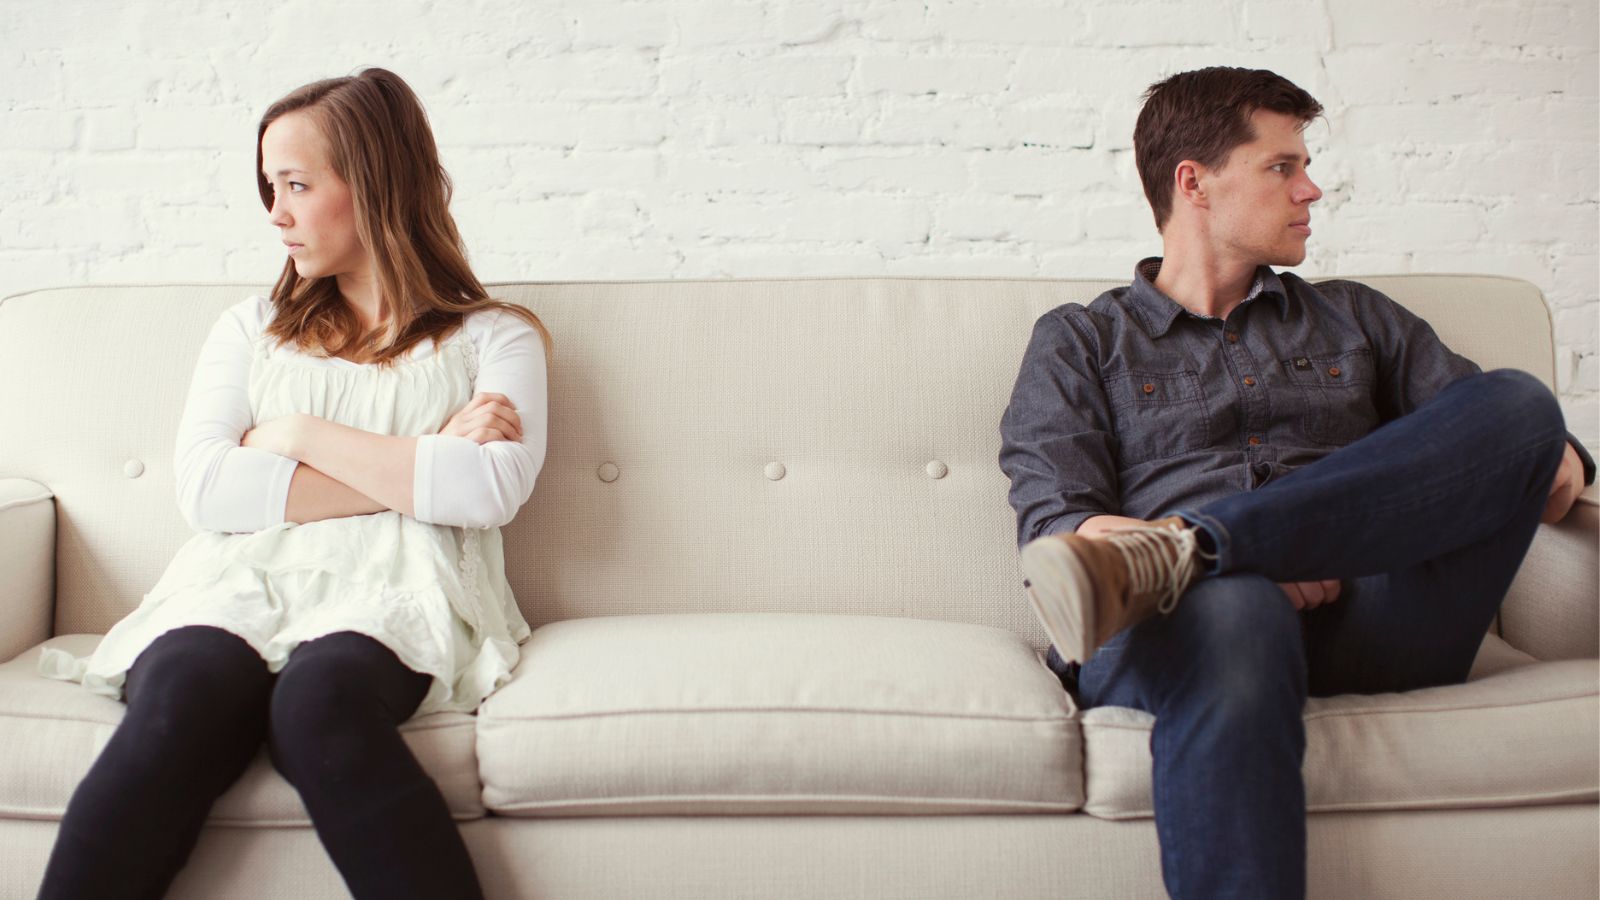 Angry man and woman sitting on opposite sides of a couch